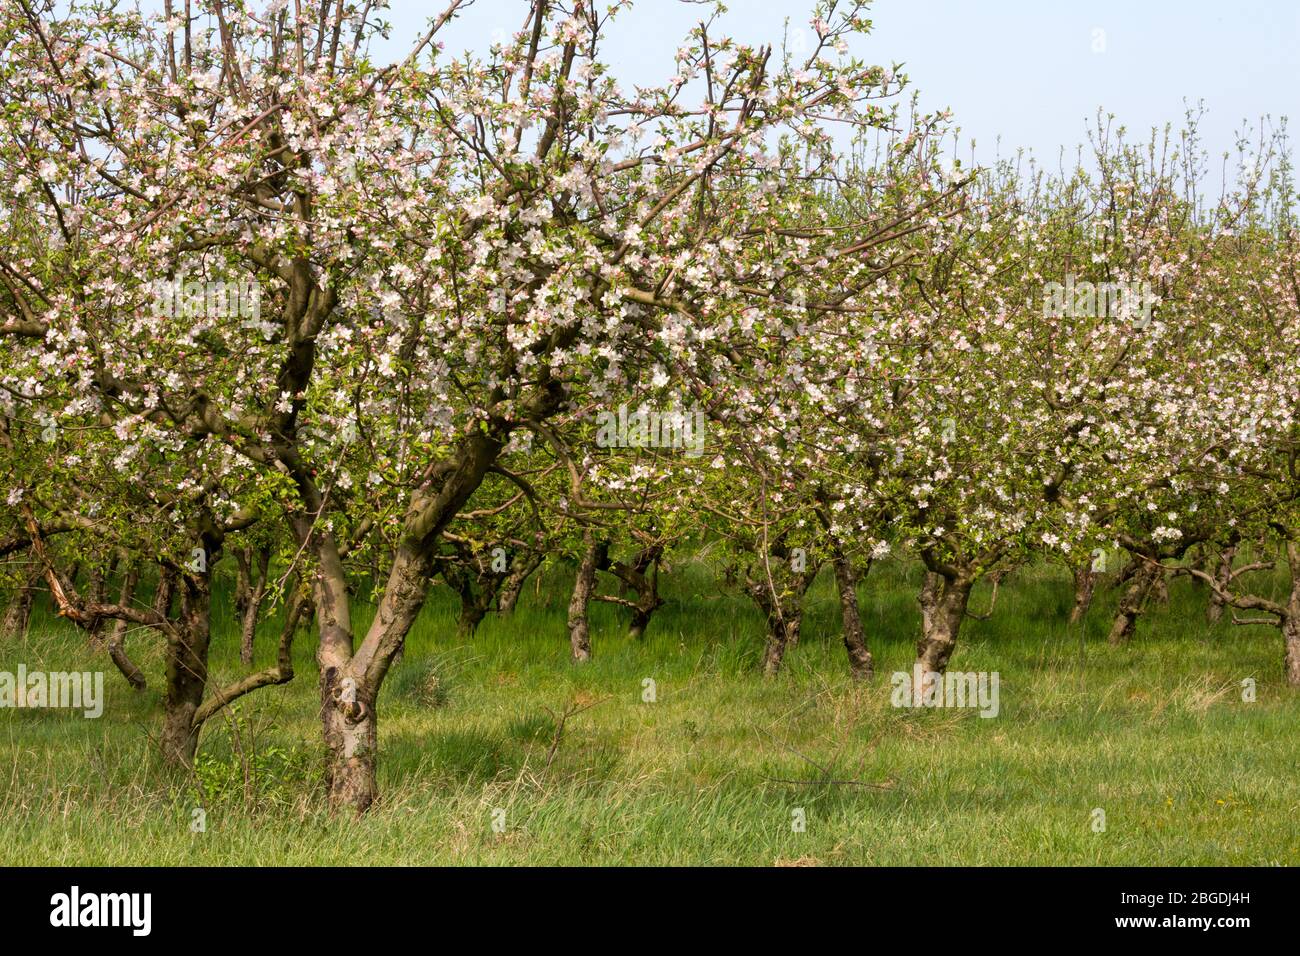 Blooming apple trees Stock Photo